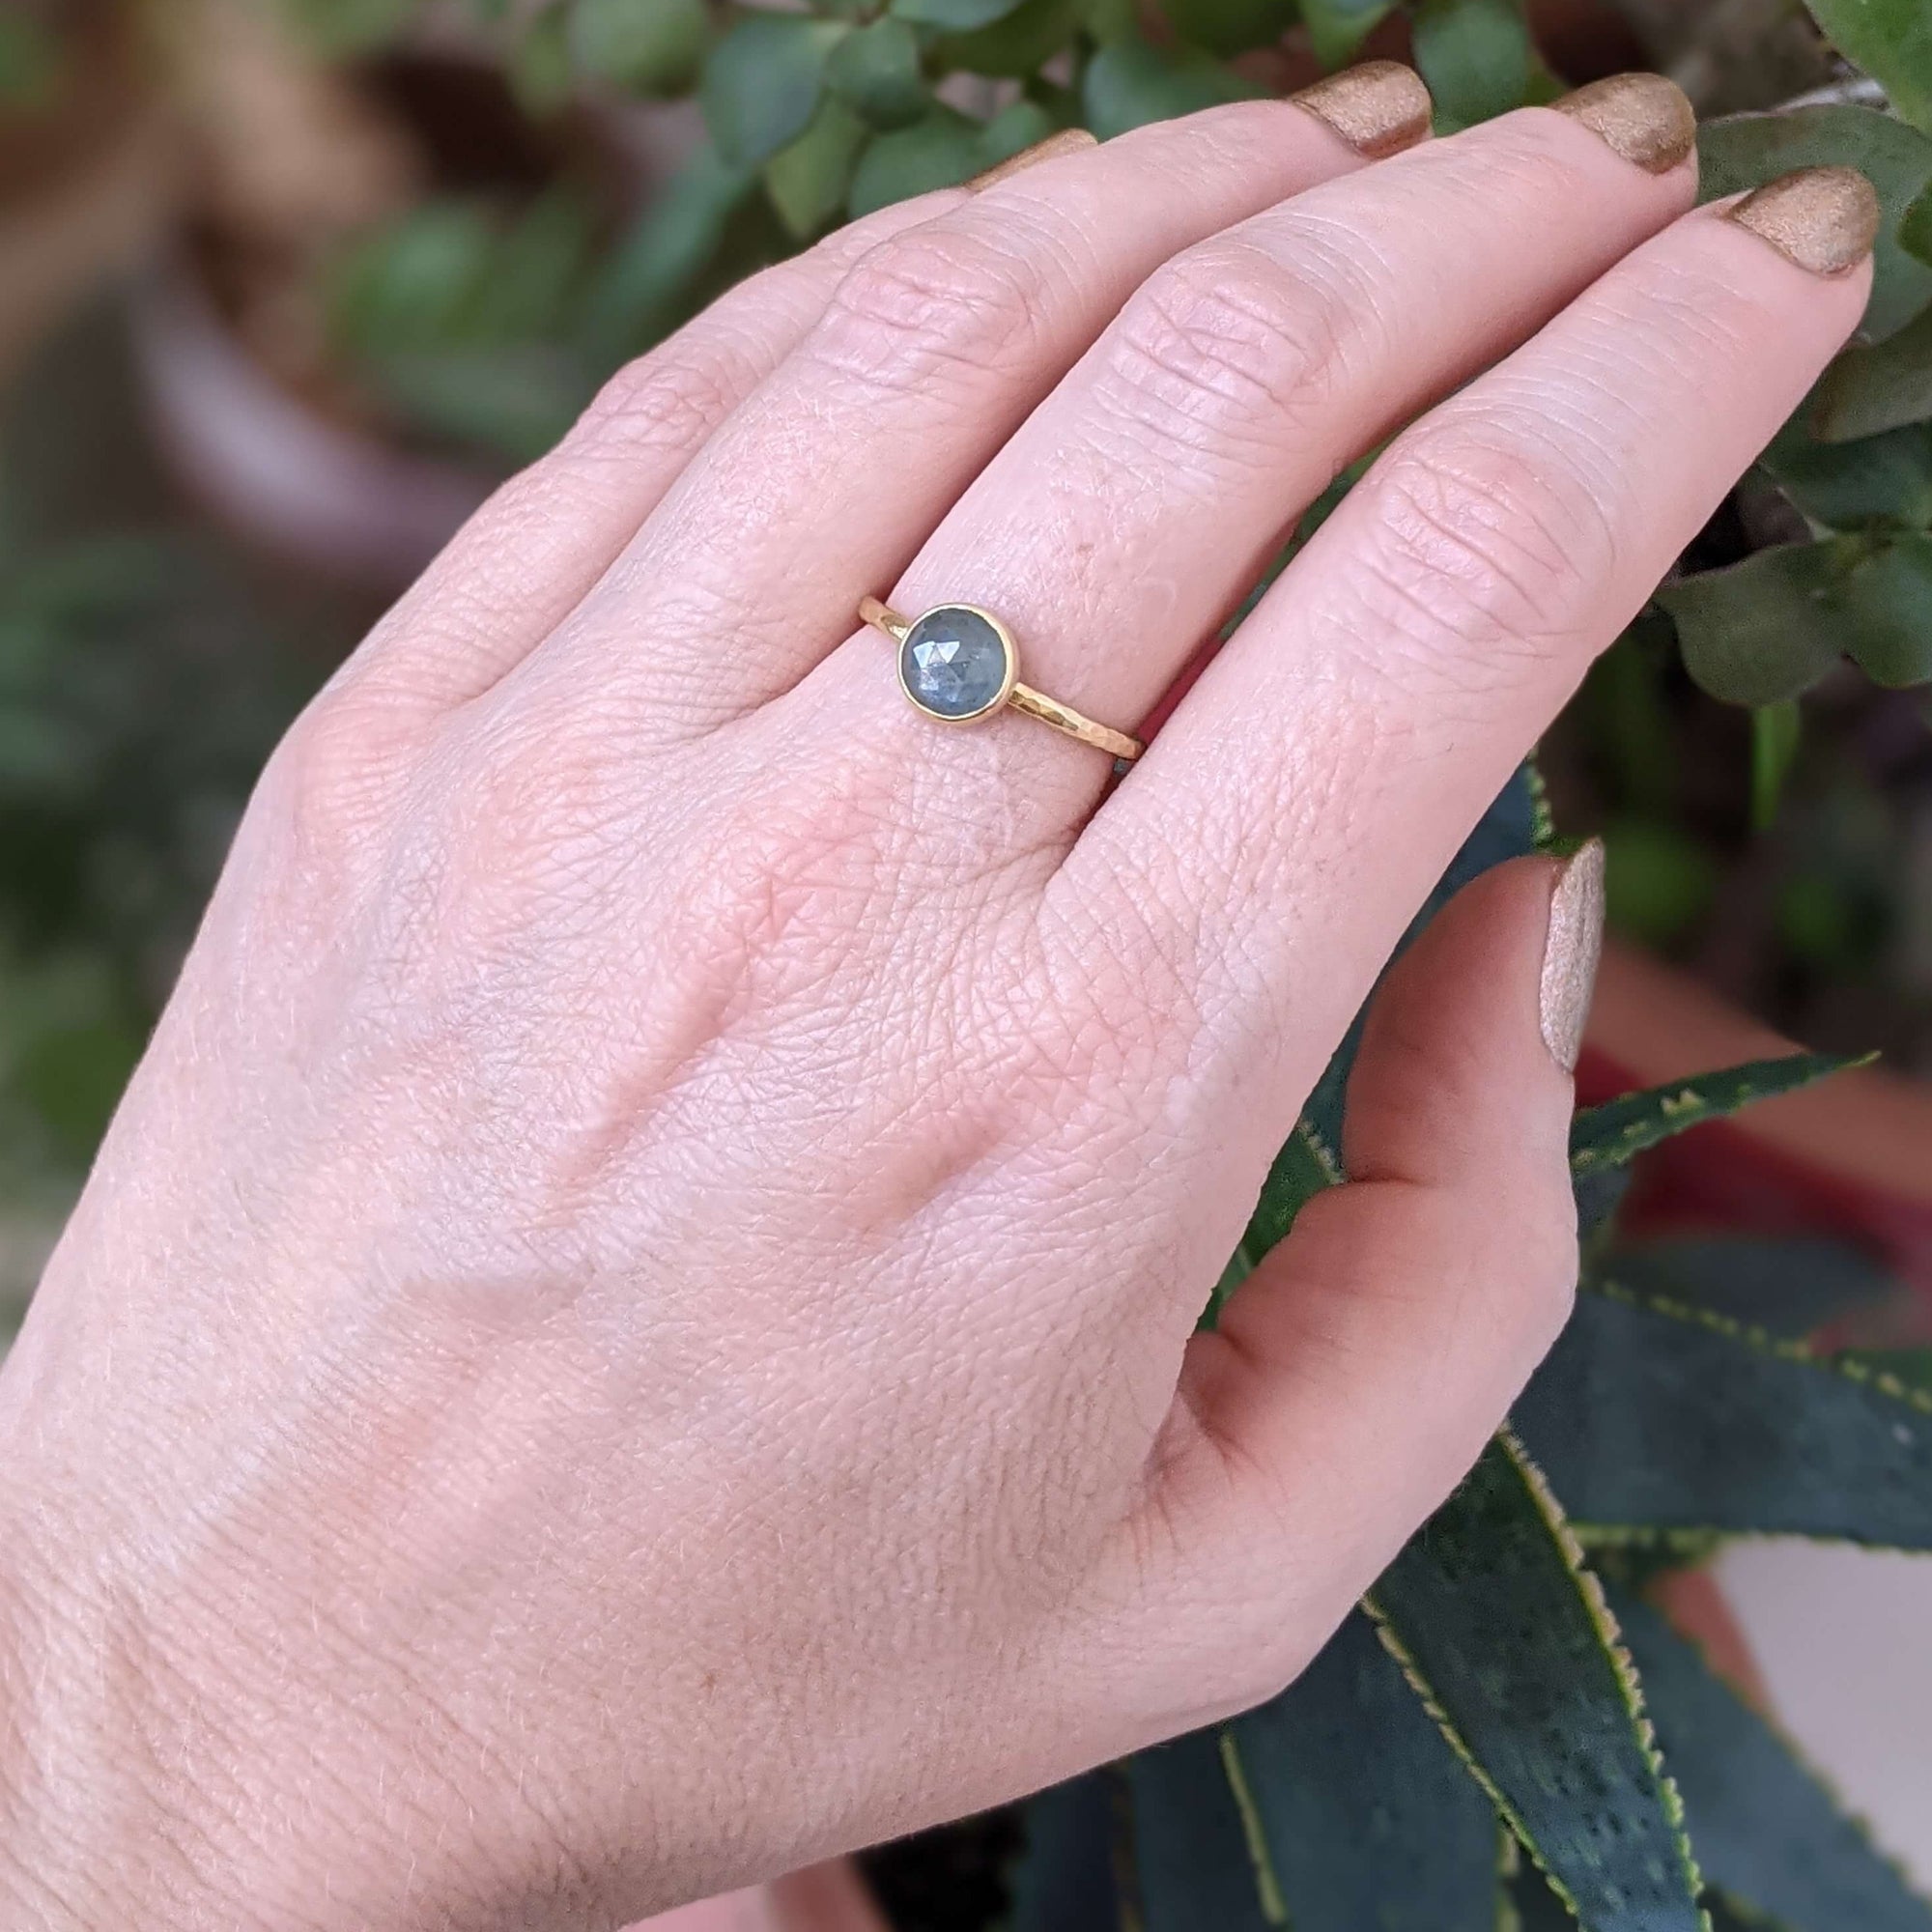 Blue rose cut sapphire ring in 18k yellow gold. Handmade with recycled metal and conflict-free stone by EC Design in Minneapolis, MN.